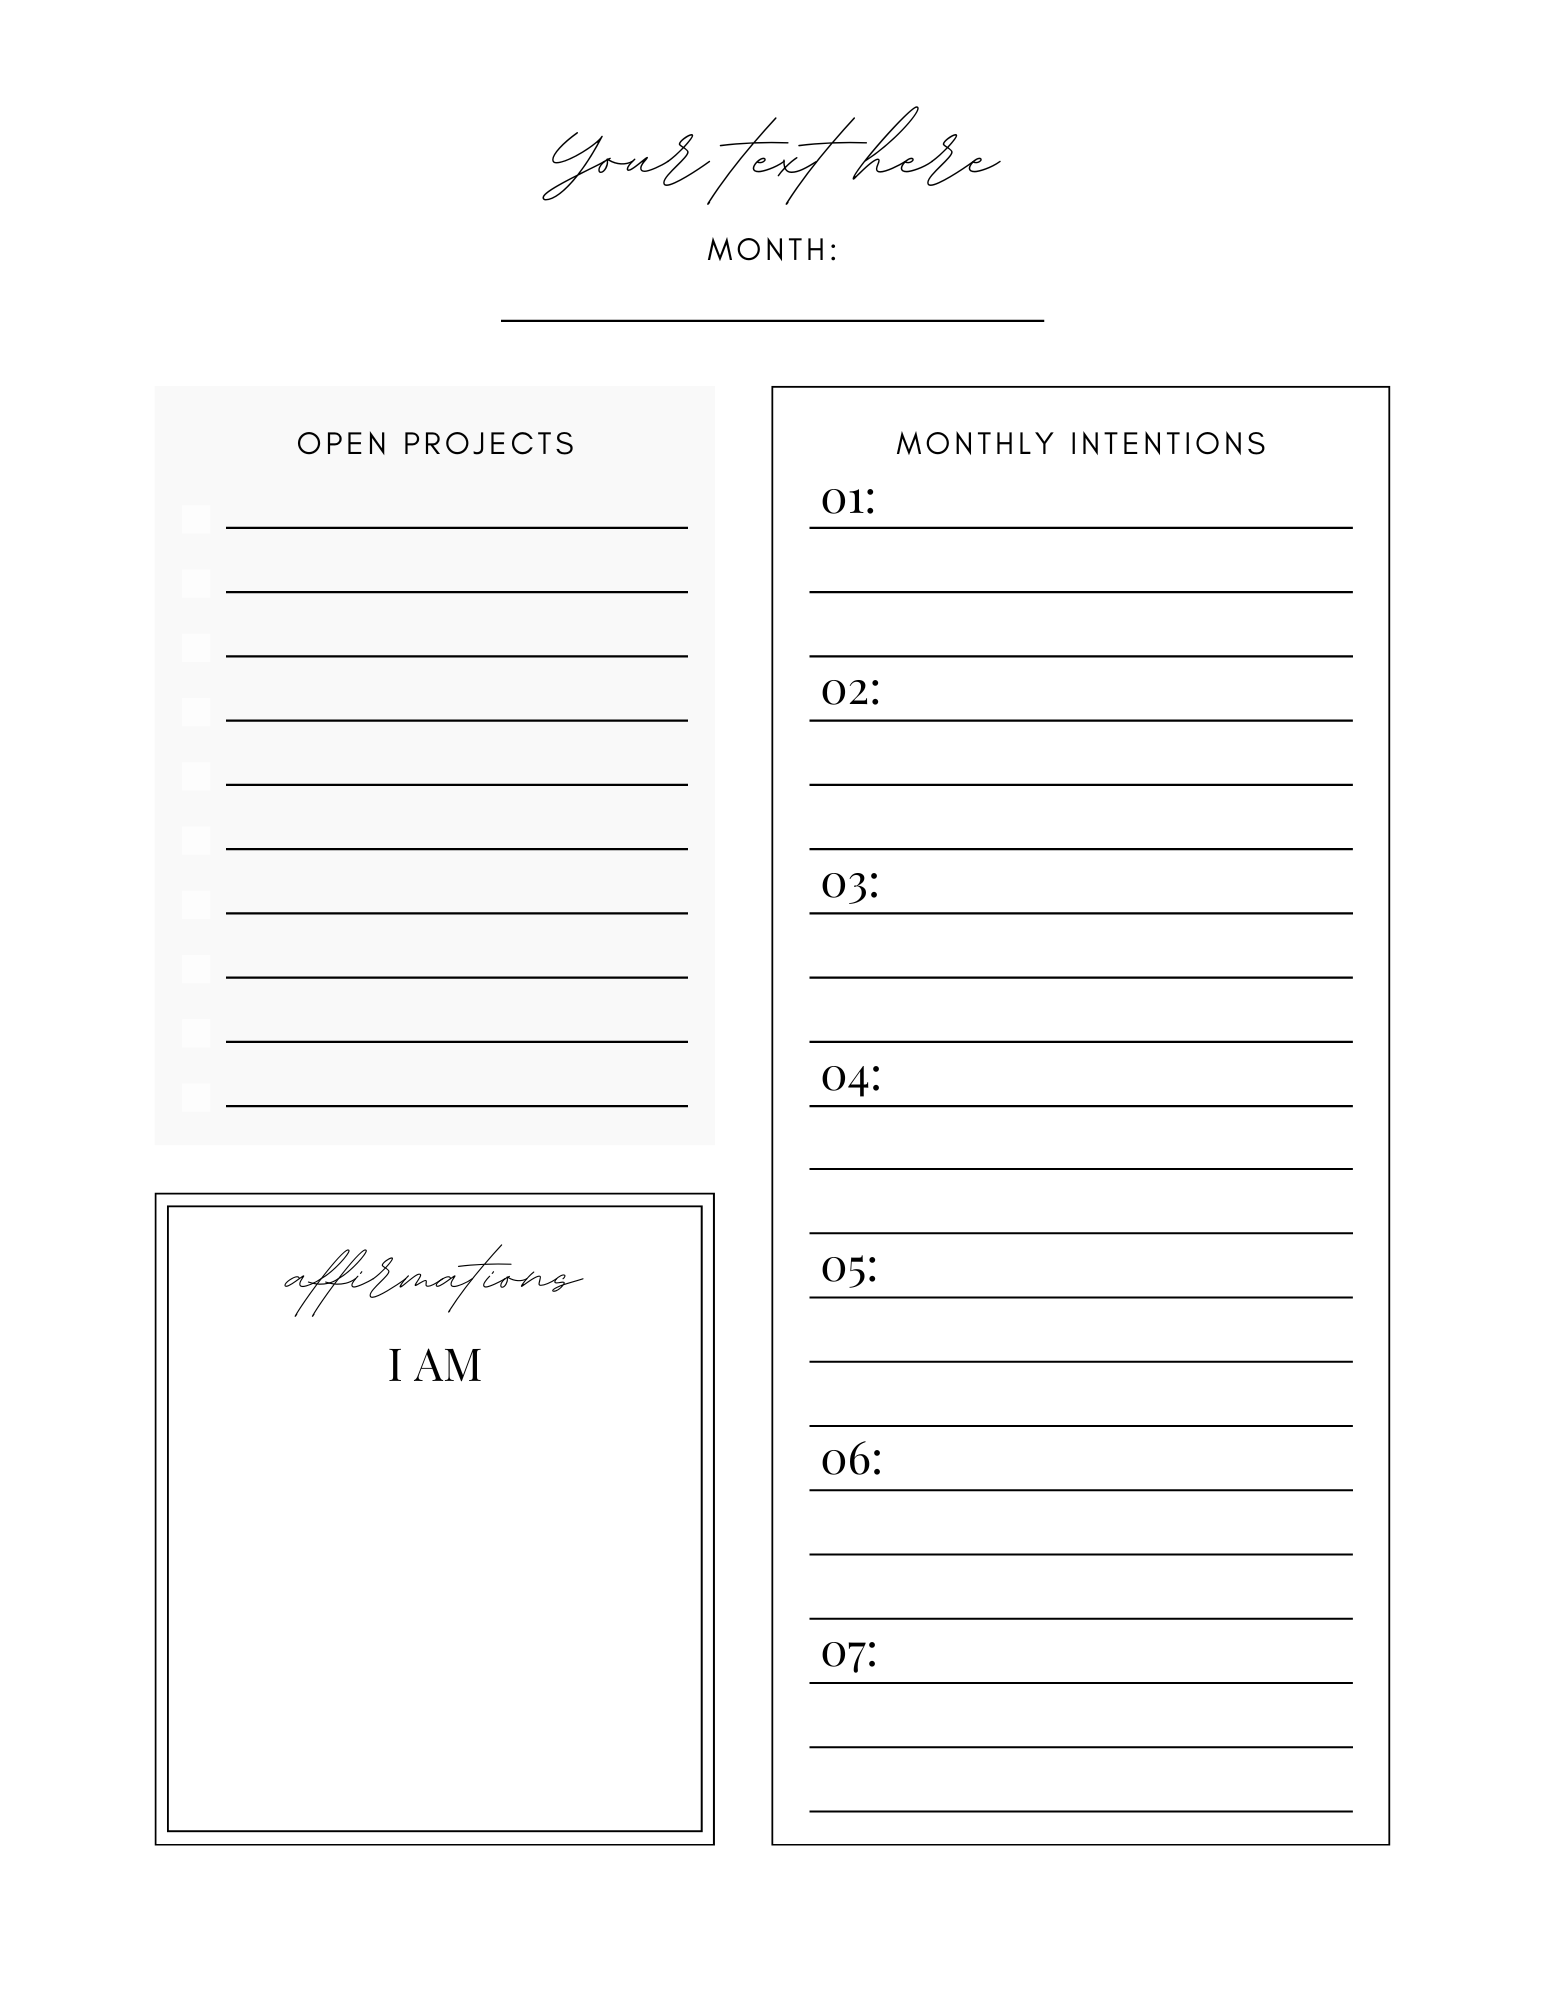 A rectangular dry erase acrylic board with sections titled "Open Projects," "Monthly Intentions," and "Affirmations." The board is blank, designed for customizable use, and has a clean, minimalist design. The top is labeled "Your Text Here" and "Month:," making it perfect for planning and goal setting.